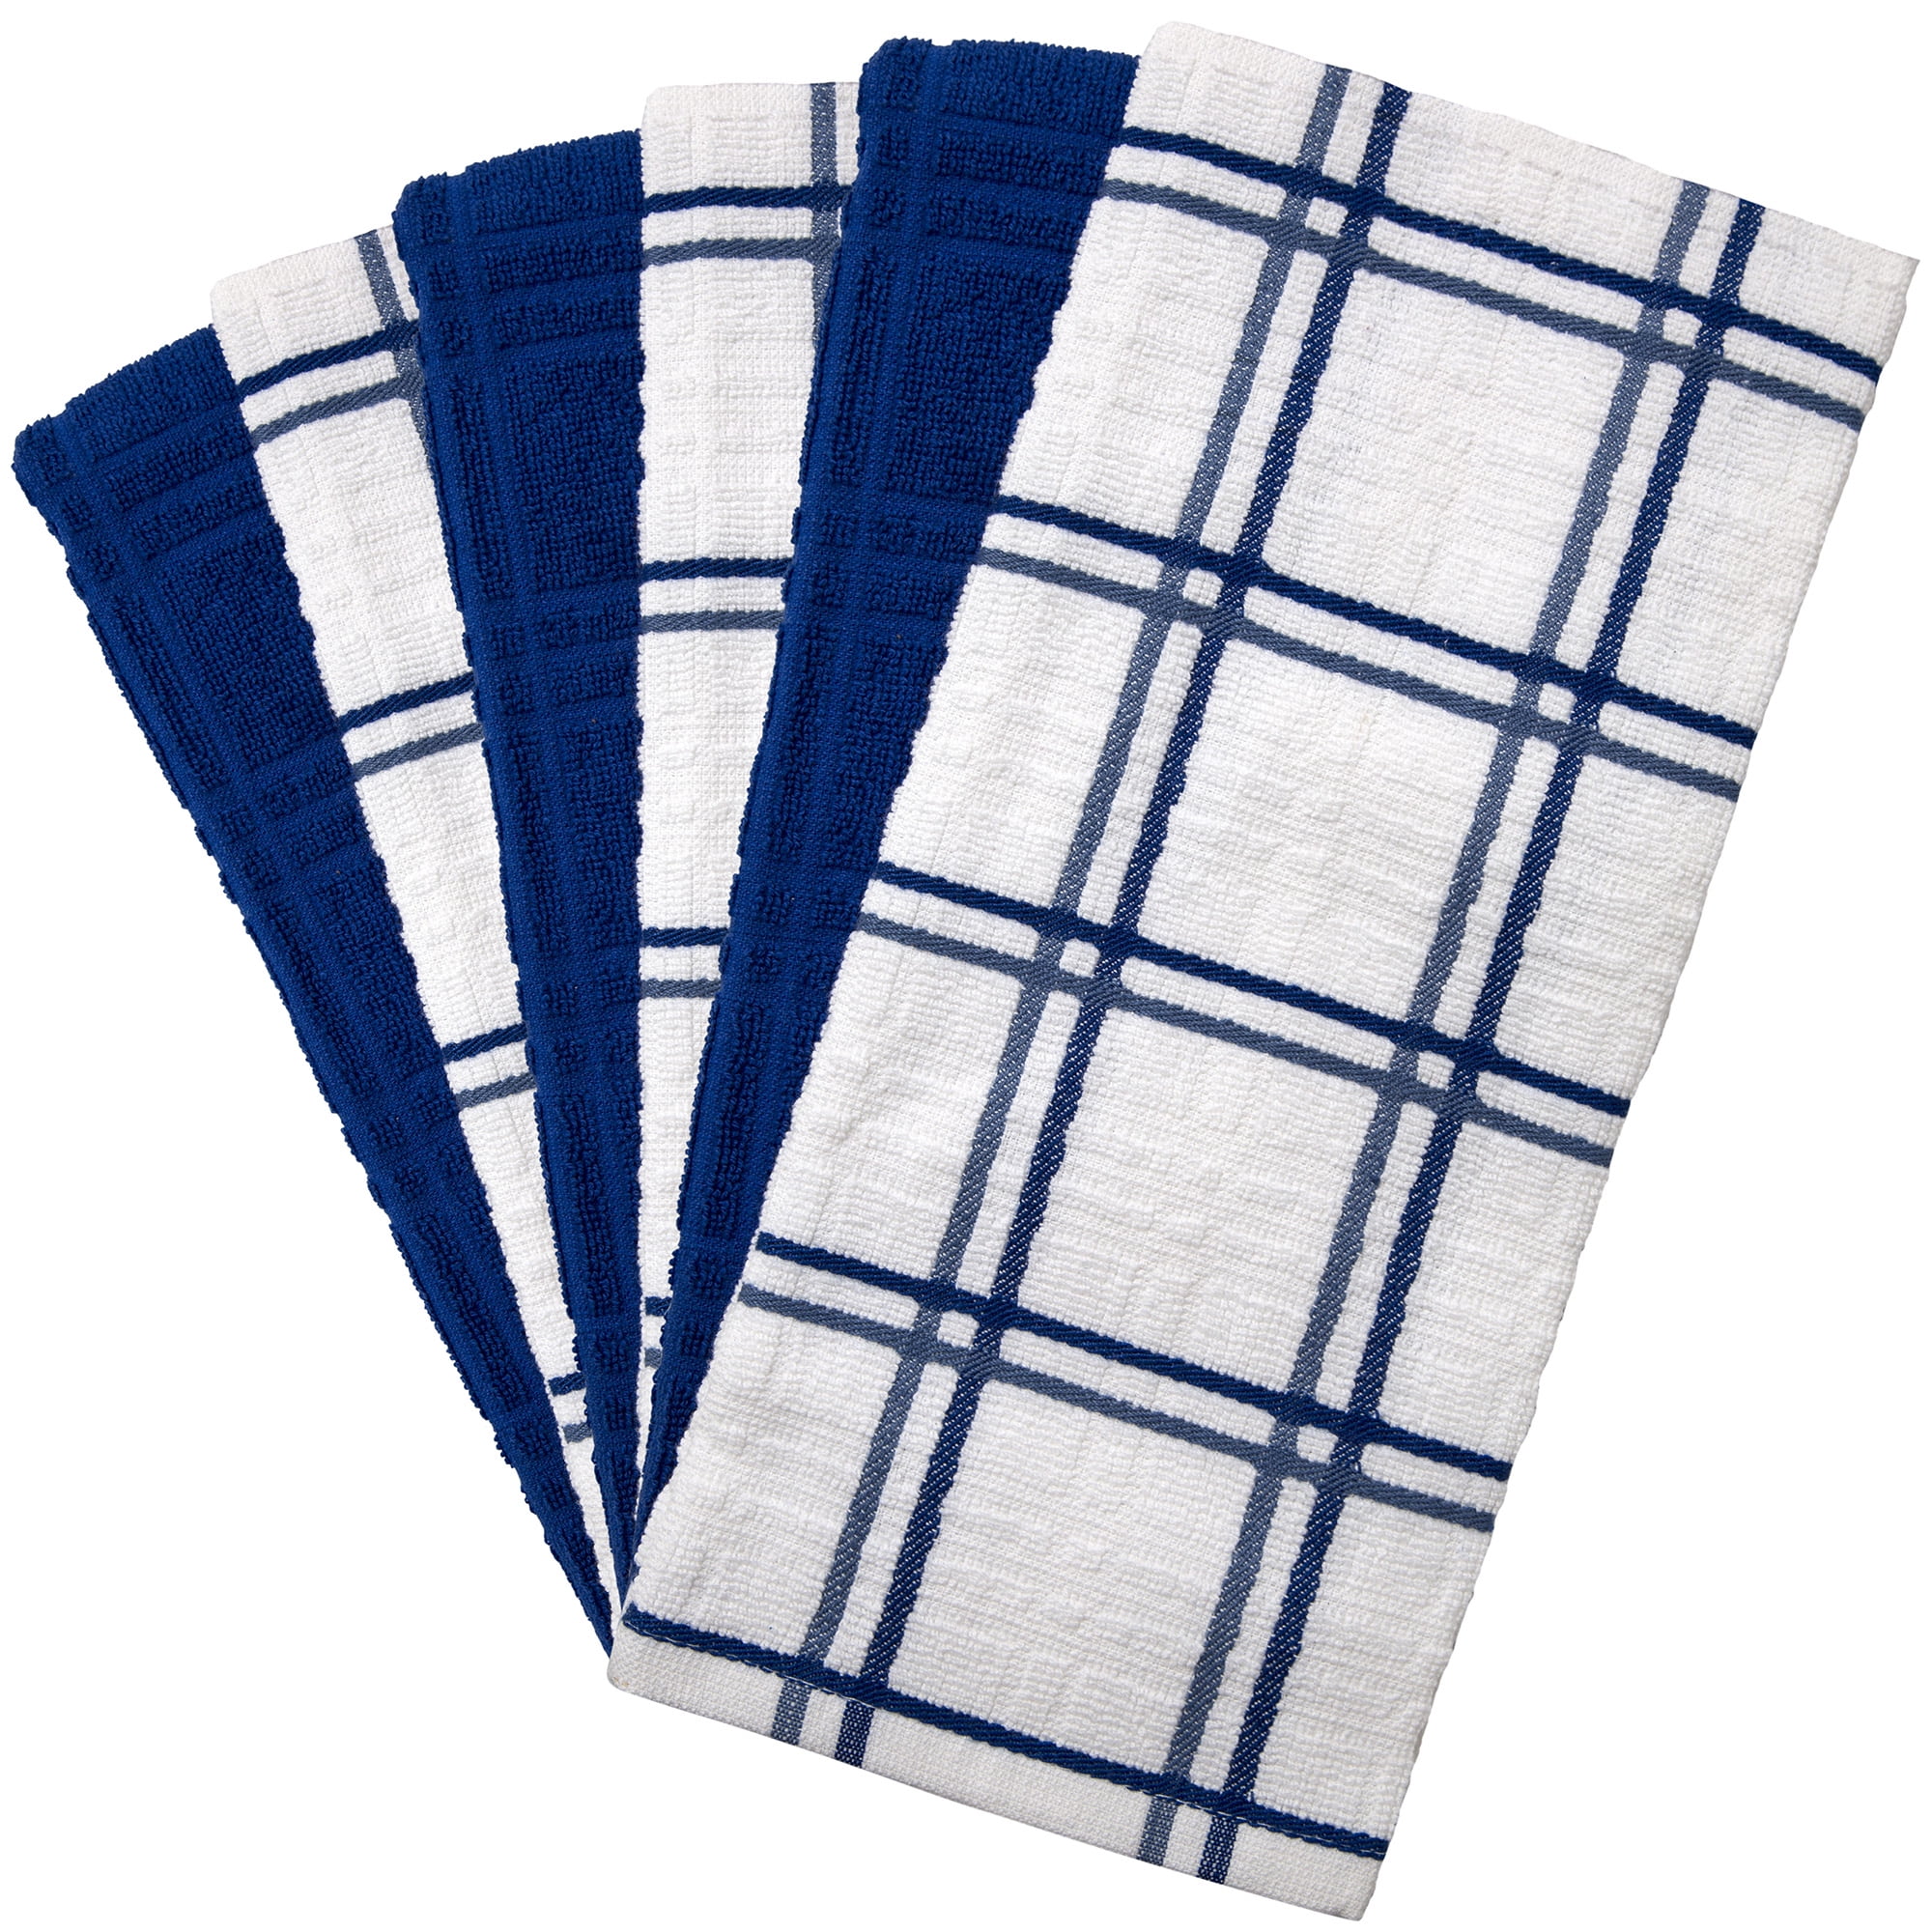 Premium Kitchen Towels (16”x 26”, 6 Pack) | Large Cotton Kitchen Hand  Towels | Popcorn Striped Design | Dish Towels | 430 GSM Highly Absorbent  Tea